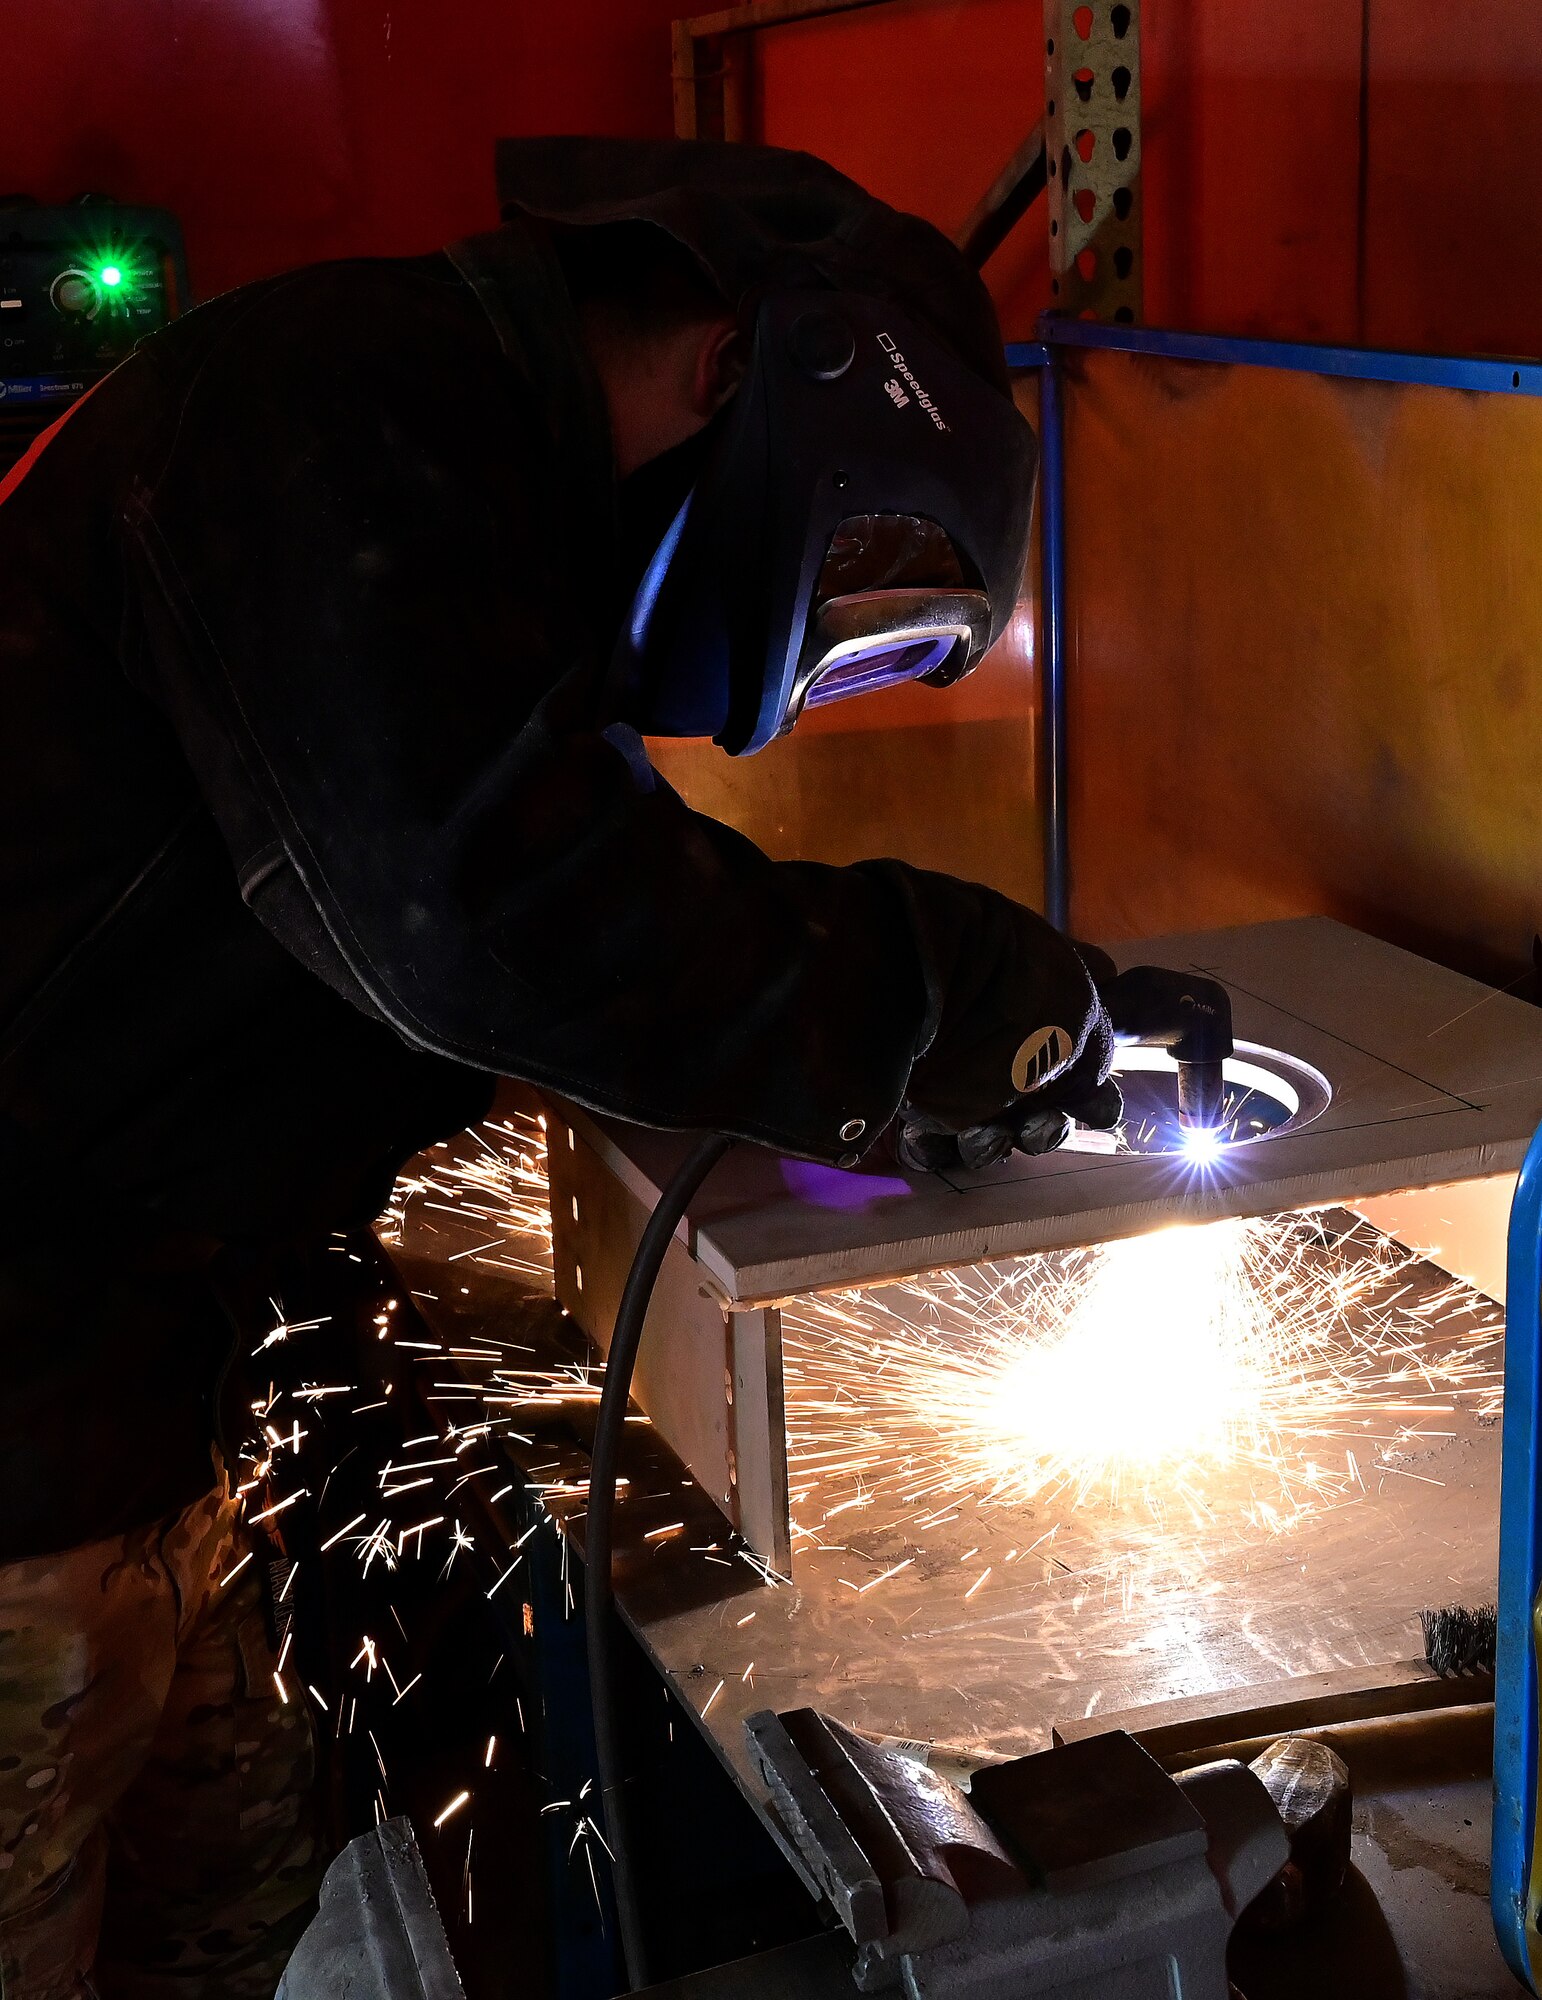 U.S. Air Force Staff Sgt. Luke Gorst, 409th Expeditionary Security Forces Squadron vehicle control officer, uses a plasma cutter to cut a guard tower firing port shield at Nigerien Air Base 201, Agadez, Niger, Feb. 8, 2022. Security forces members developed improvements for the guard towers which included modified firing ports to create a better firing platform and increased field of view for Defenders.  (U.S. Air Force photo by Tech. Sgt. Stephanie Longoria)